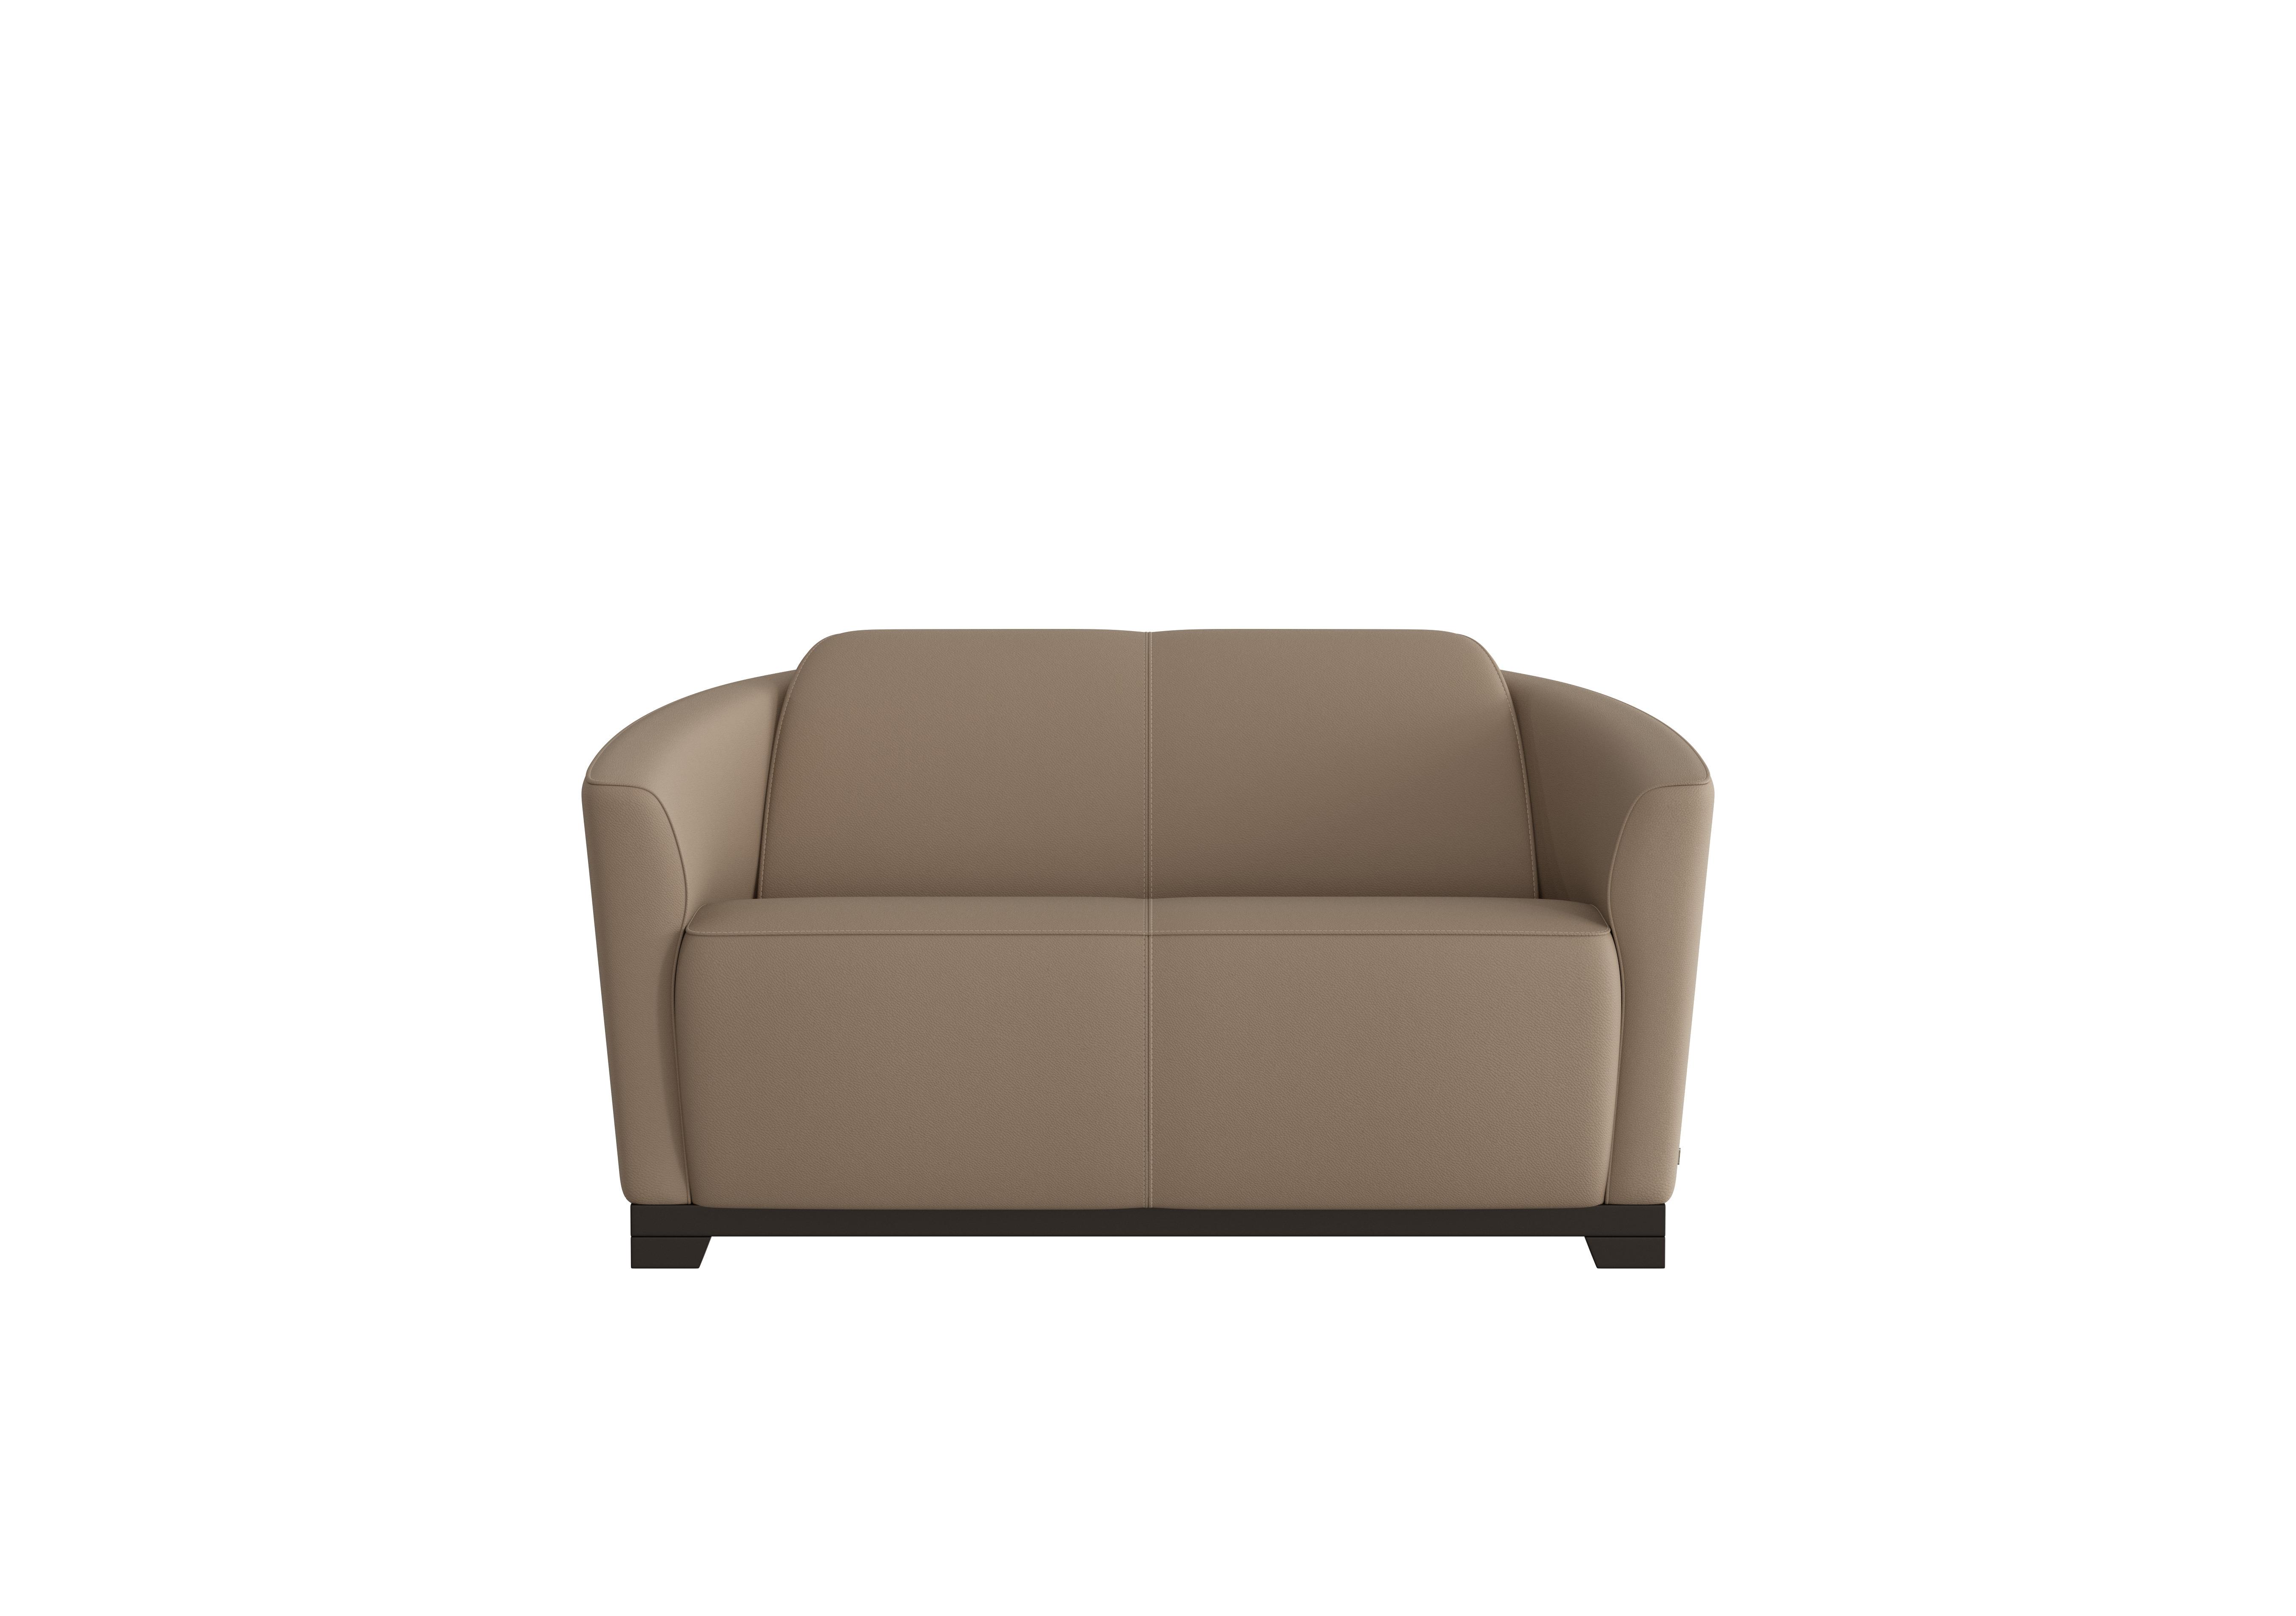 Ketty 2 Seater Leather Sofa in Torello Taupe 312 on Furniture Village